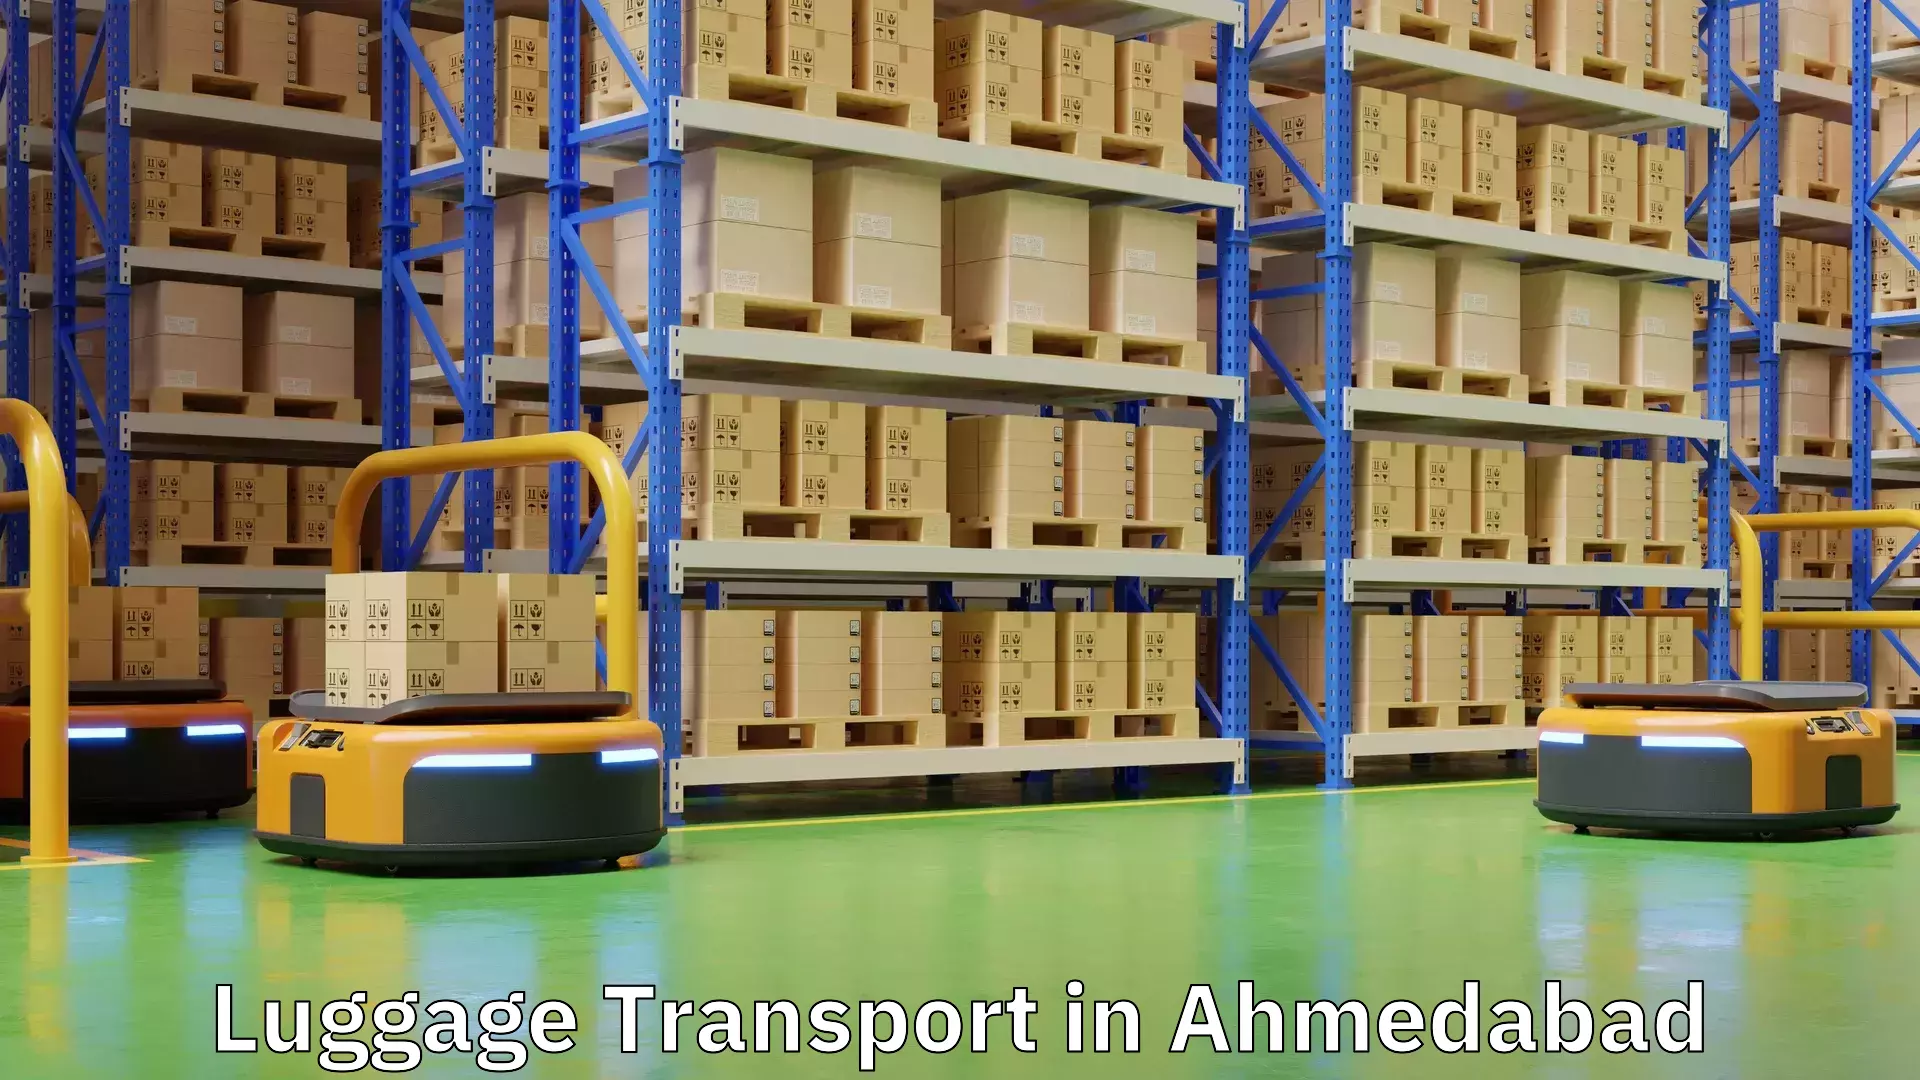 Baggage transport innovation in Ahmedabad